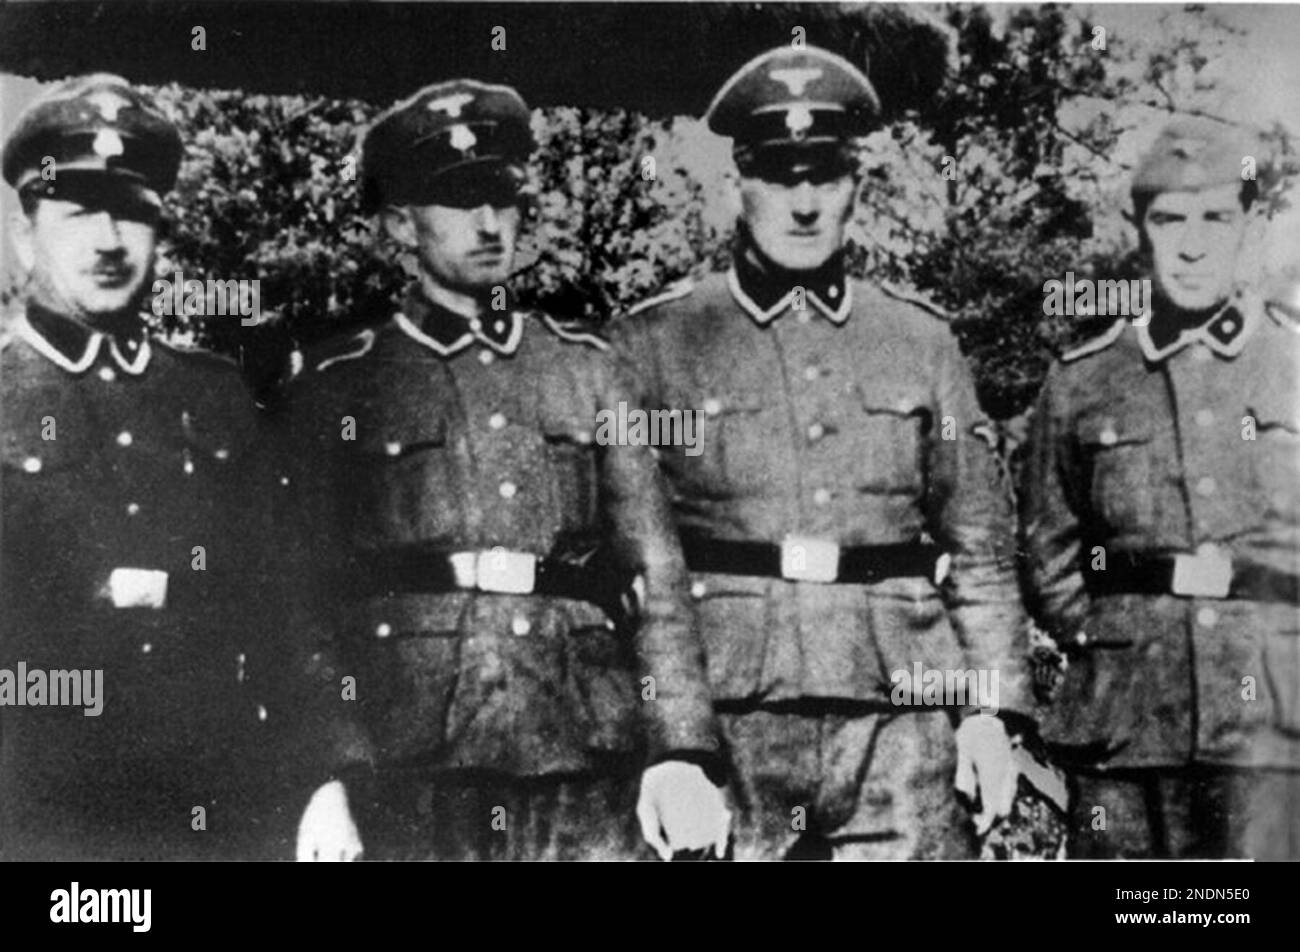 Members of Totenkopfverbände from Treblinka extermination camp (from left): Paul Bredow, Willi Mentz, Max Möller and Josef Hirtreiter. The Totenkopf guards unit were a separate unit within the SS and were responsible for the running of the concentration and extermination camps. They are distinguished by the death's head emblem on their lapel. The 3rd SS Panzer division carried the name Totenkopf but were a fighting unit not involved in the administration of the camps. Stock Photo